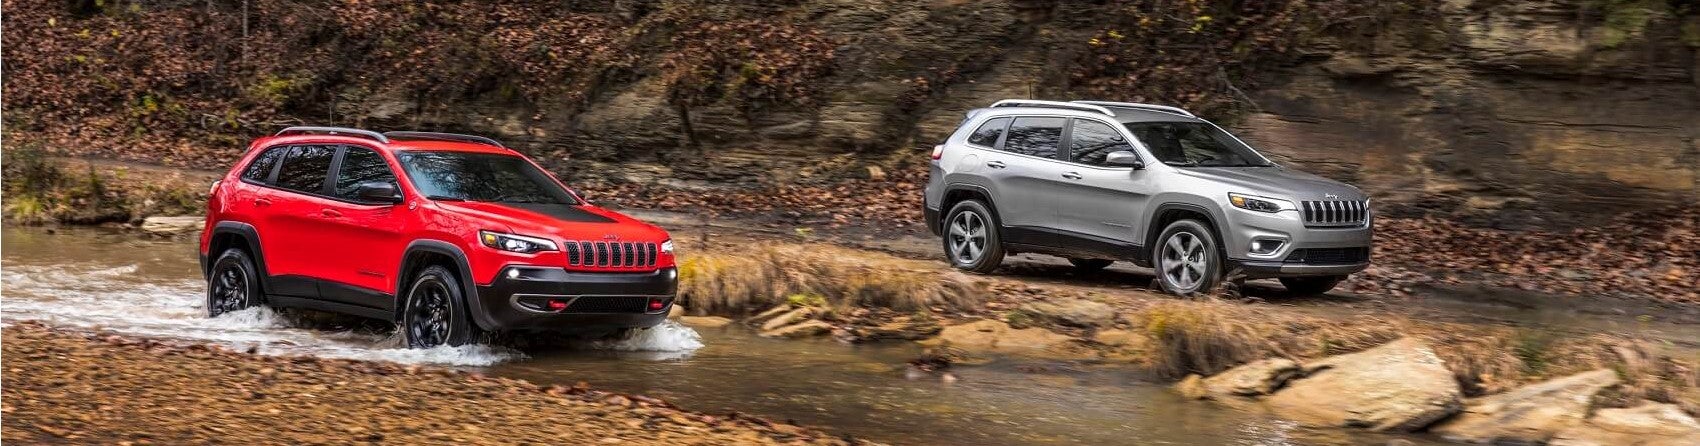 Jeep Cherokee Red and Silver Snipped